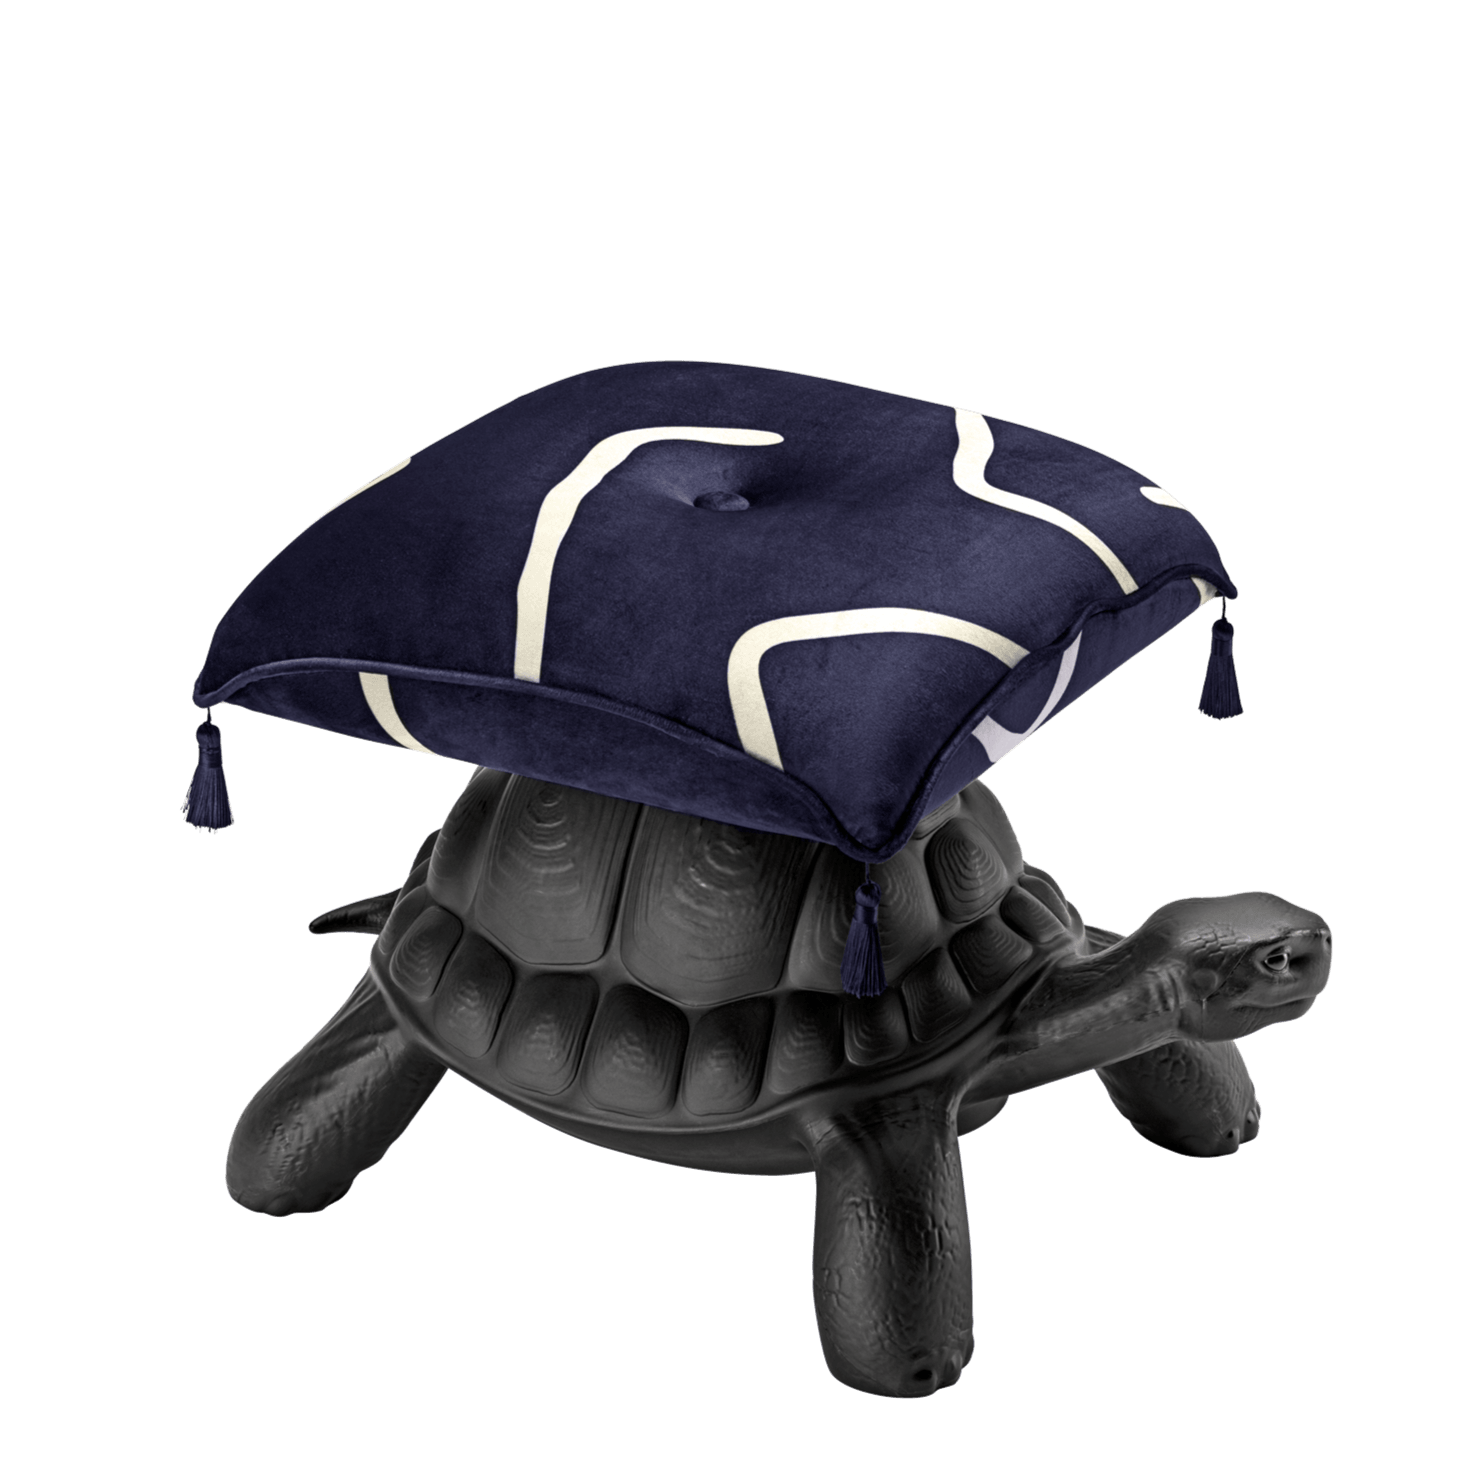 This nice, multifunctional turtle is another unusual Marcantonio project. The durable turtle armor maintains an elegant pillow, which is ideal as an unusual seat.